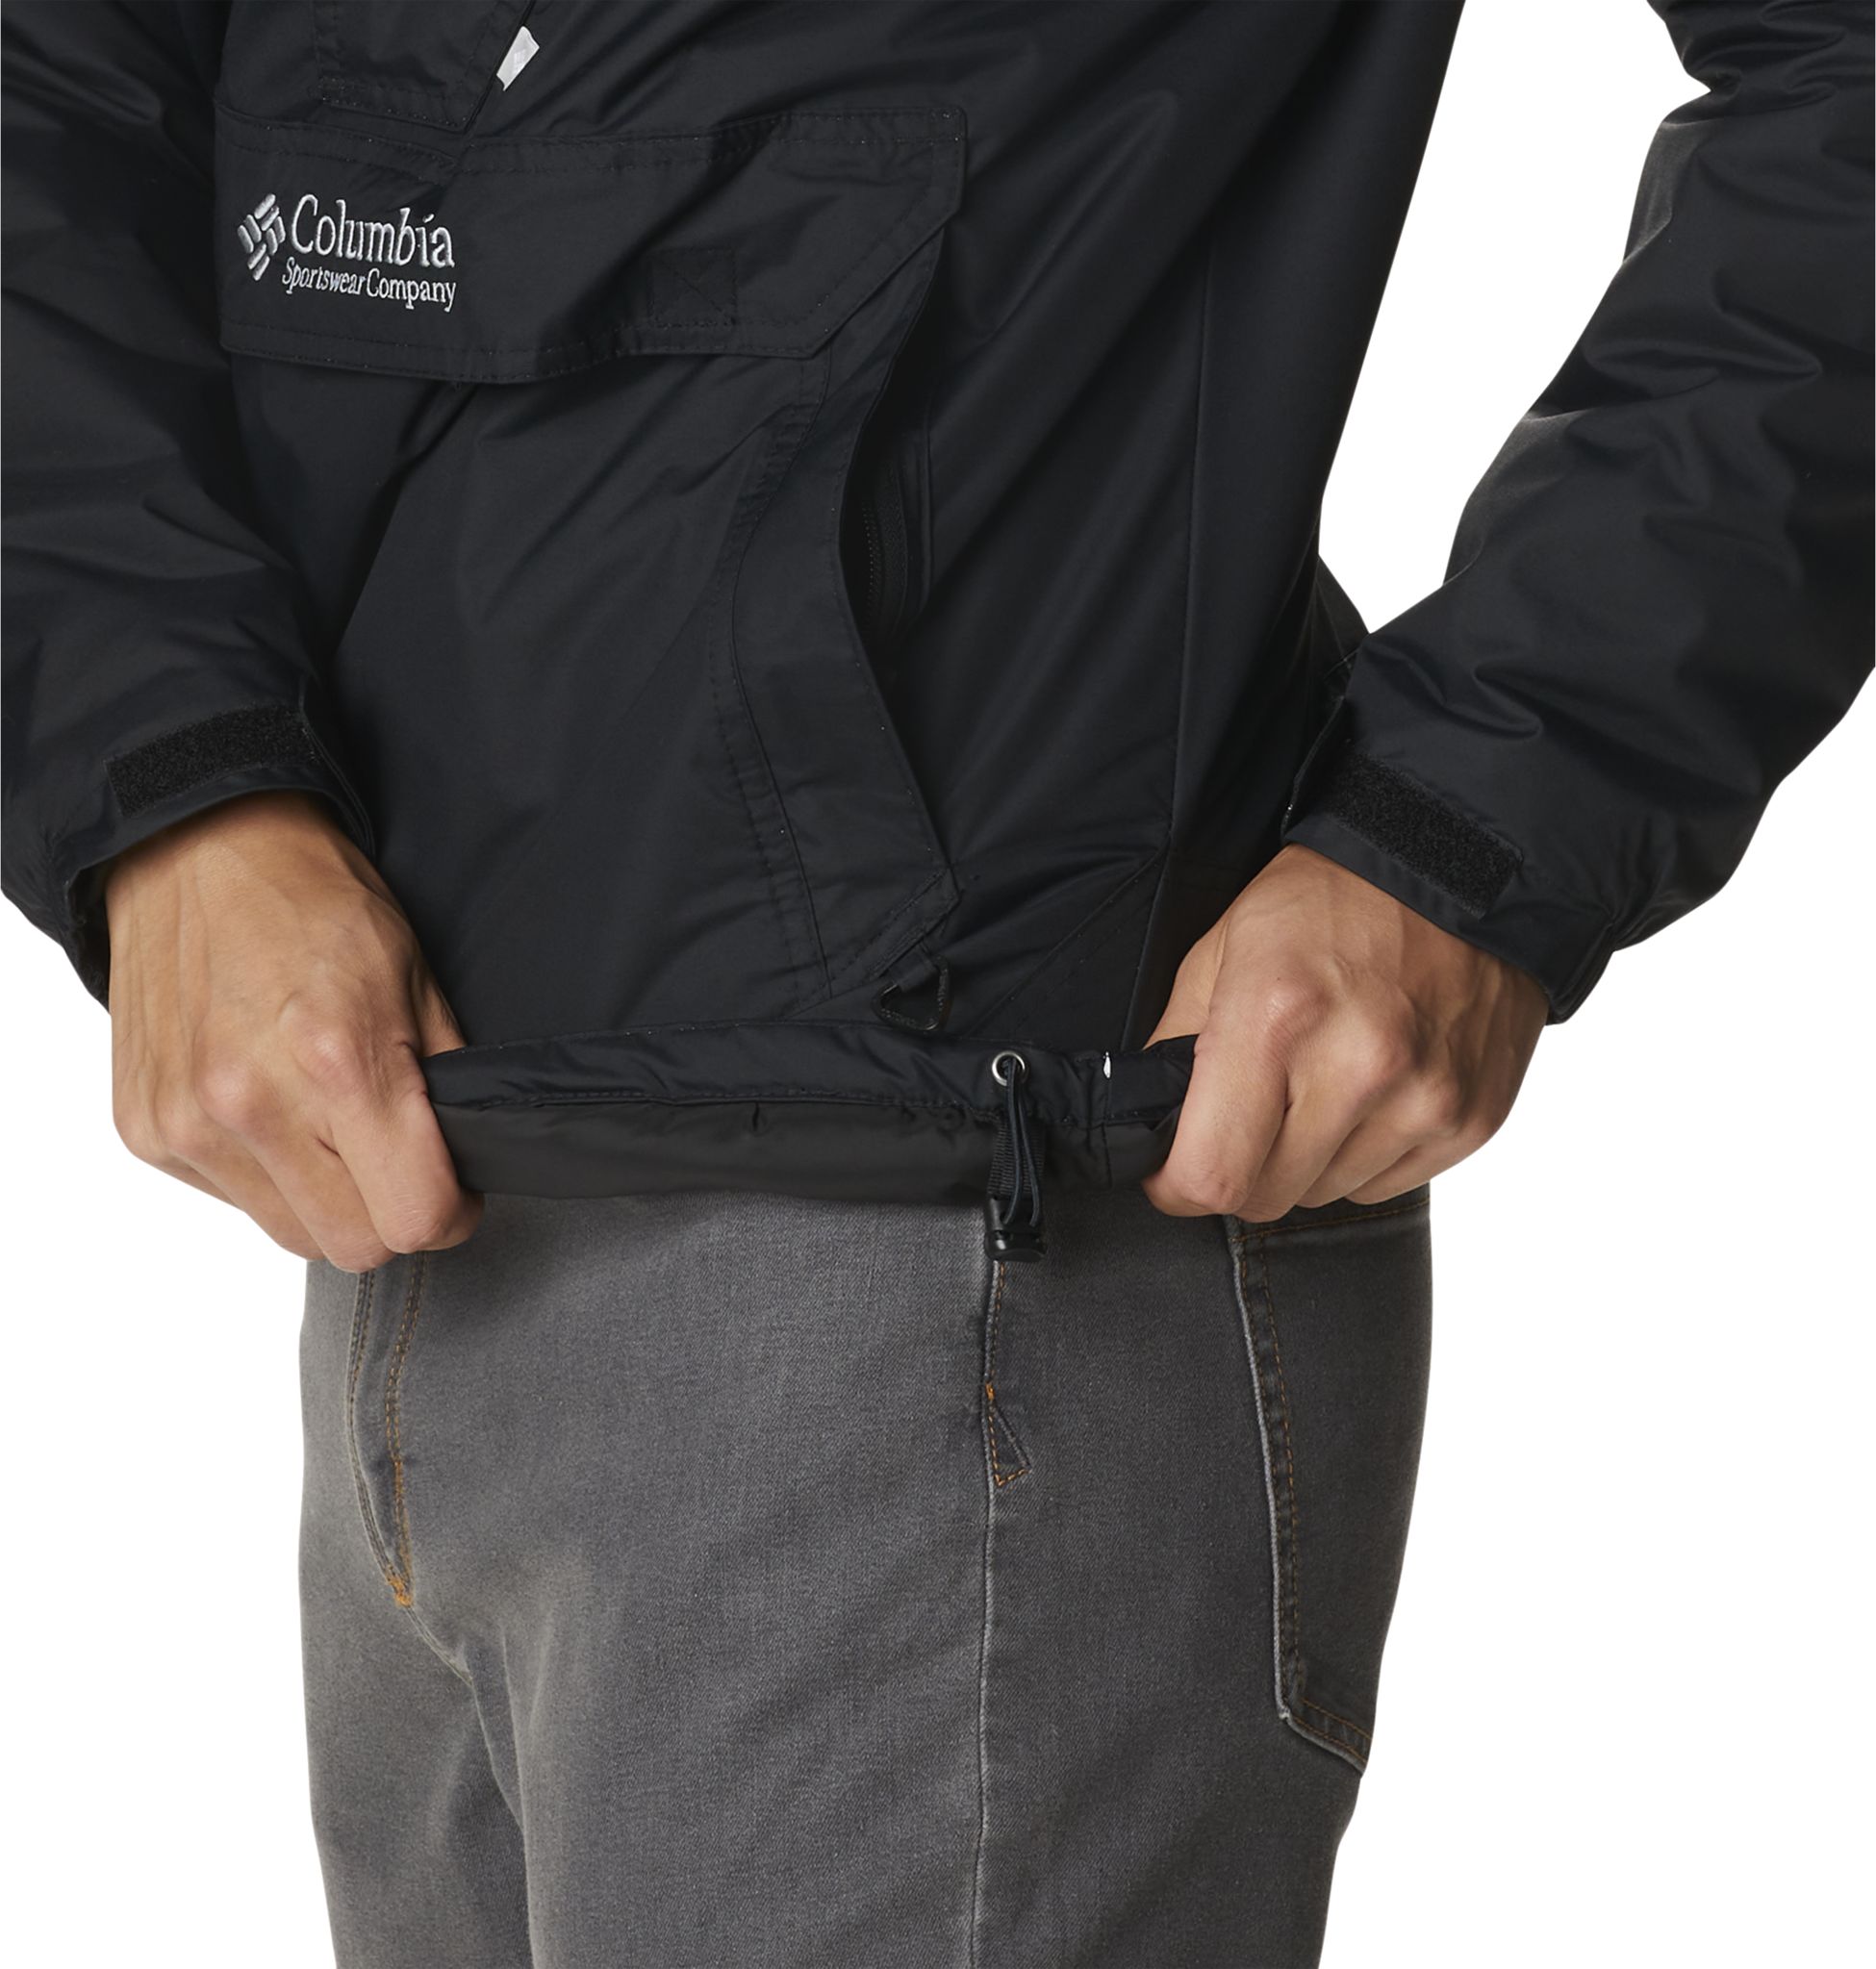 COLUMBIA, M CHALLENGER PULLOVER